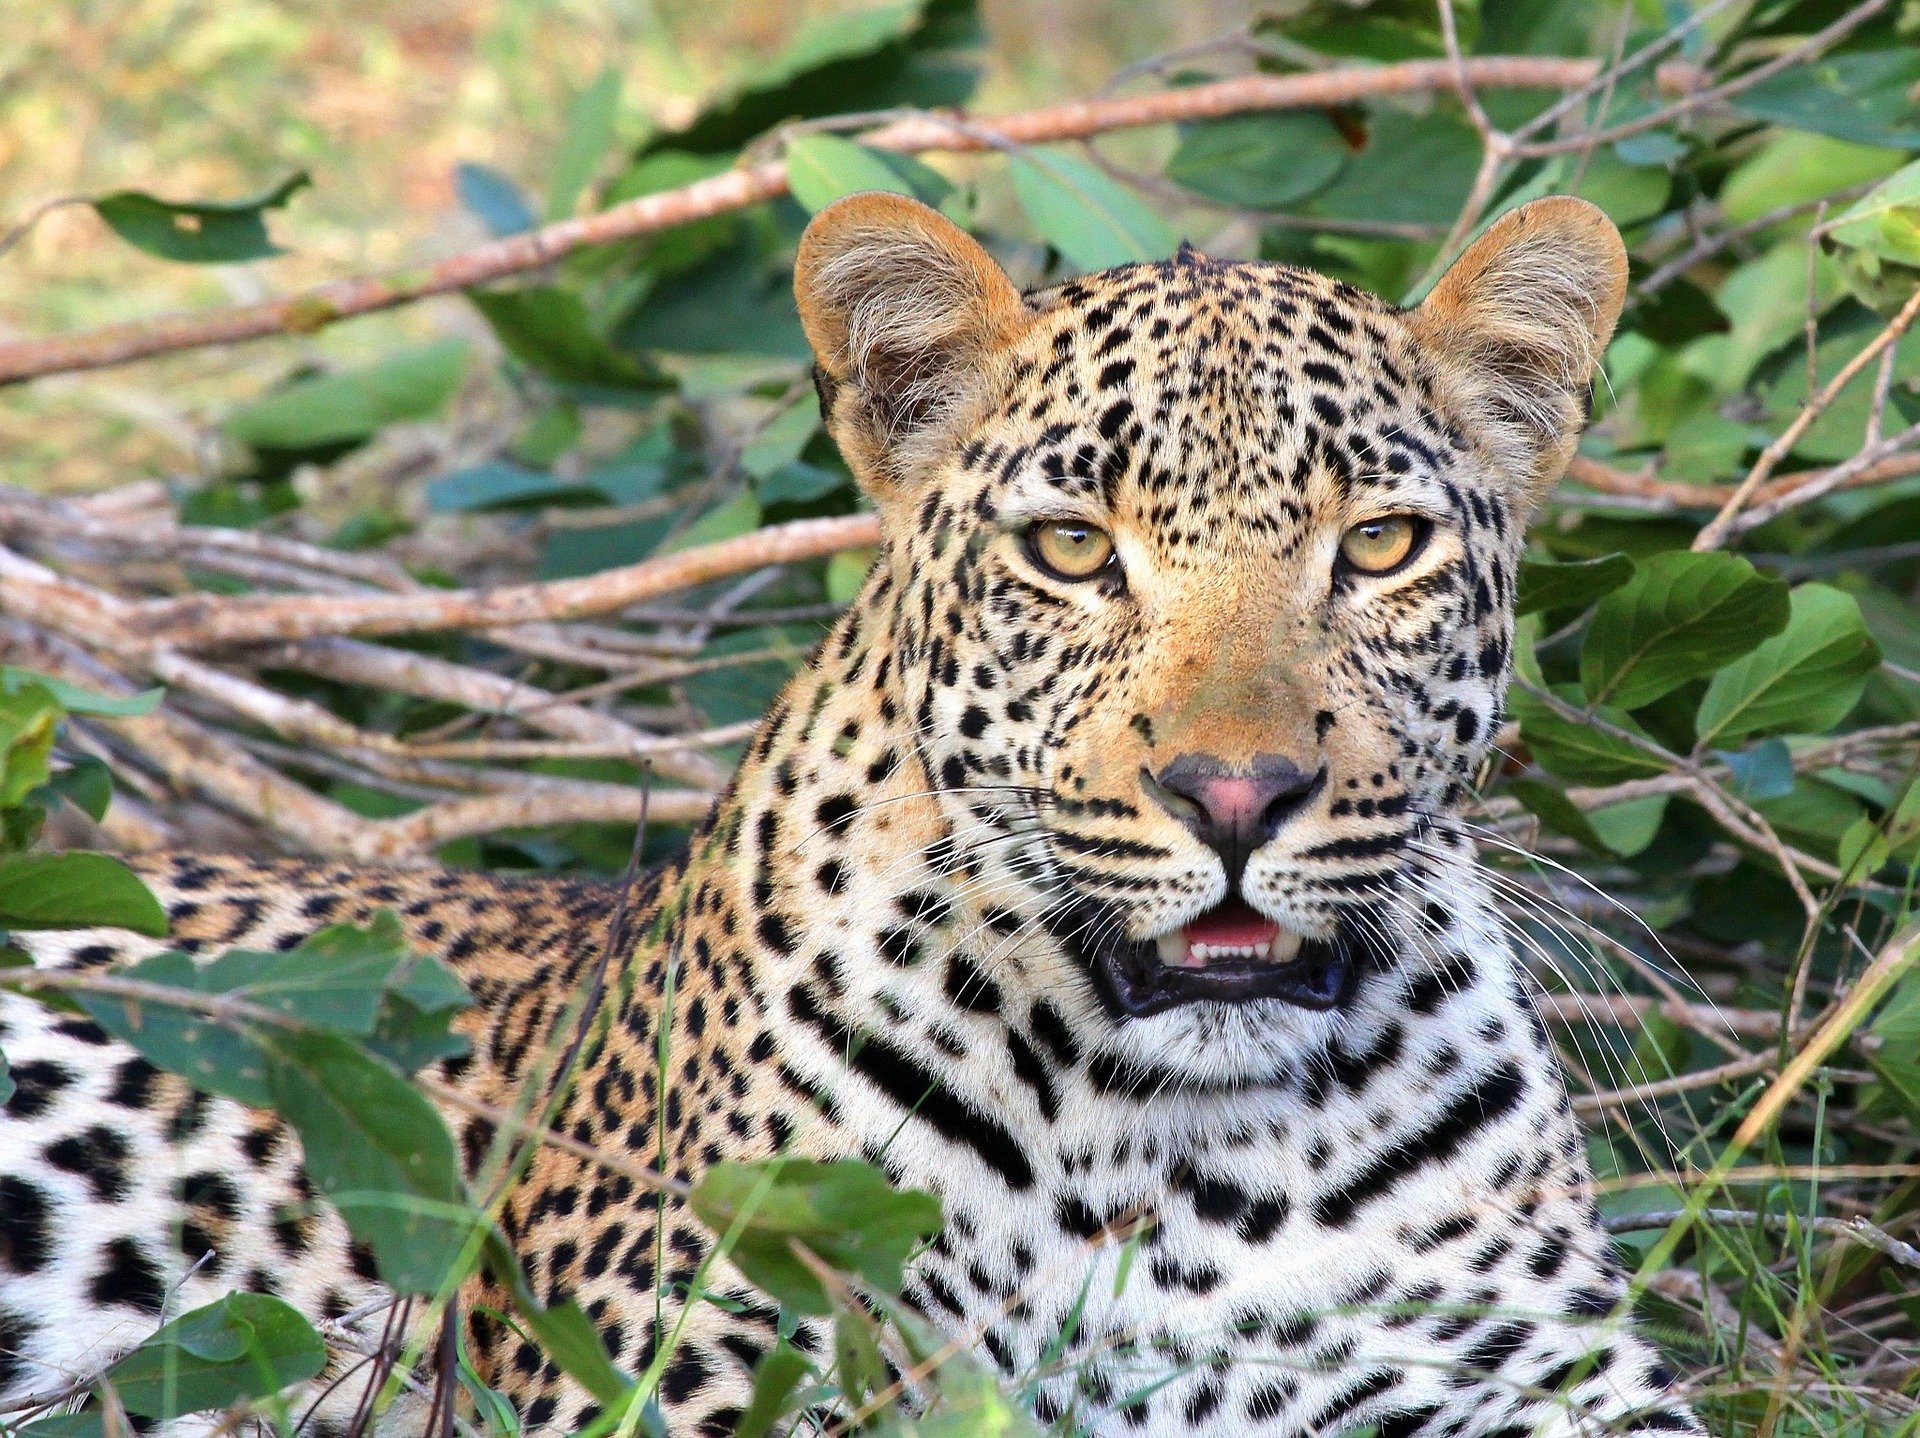 Leopard DNA study in South Africa traces ancestry to ice age—and will guide conservation